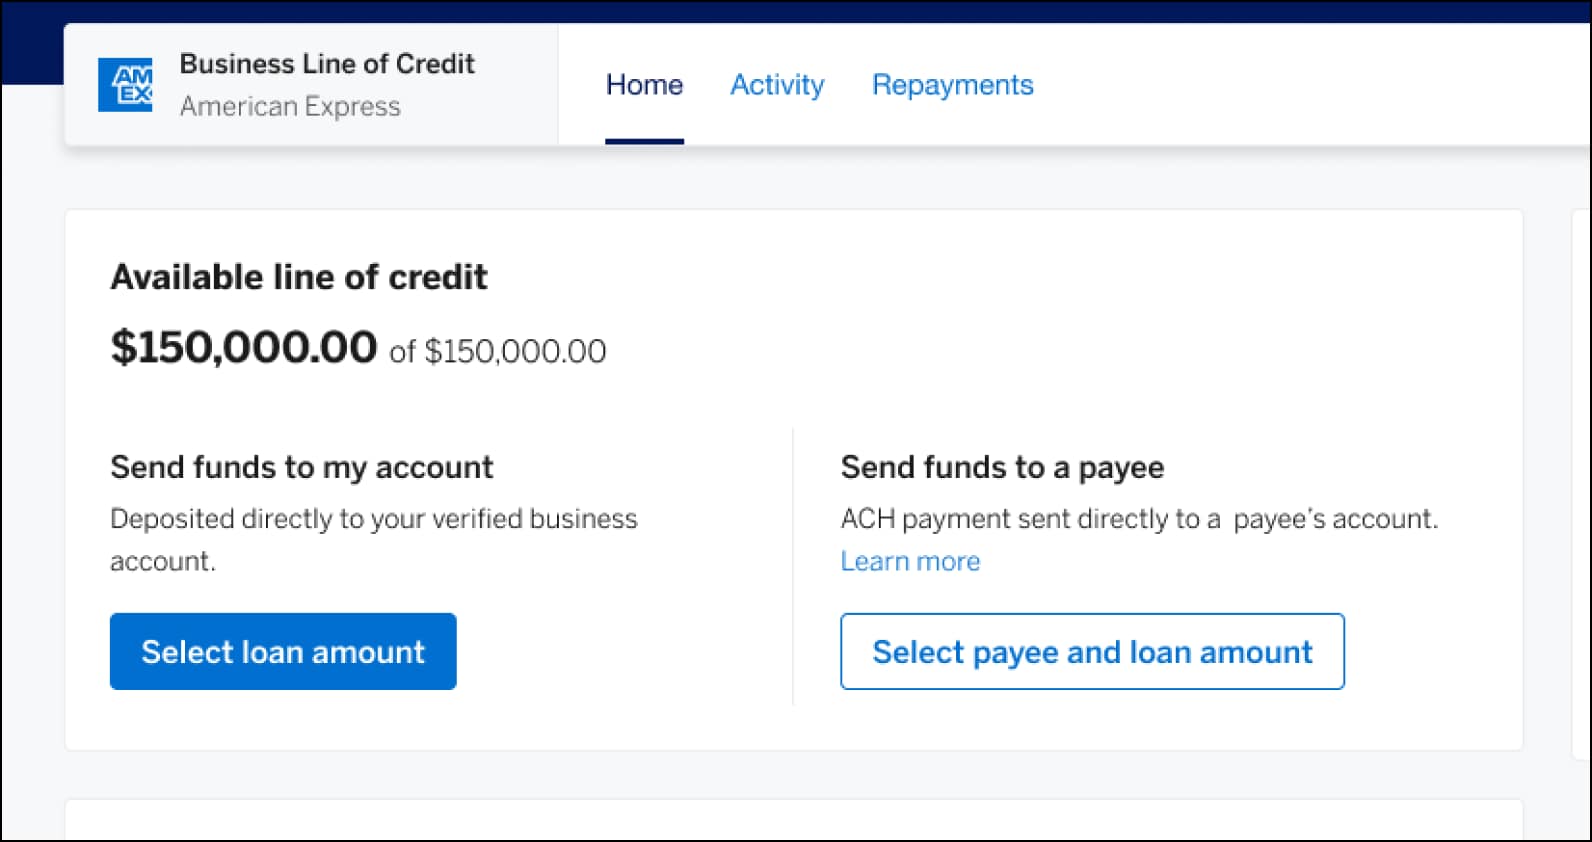 Business Line of Credit home screen